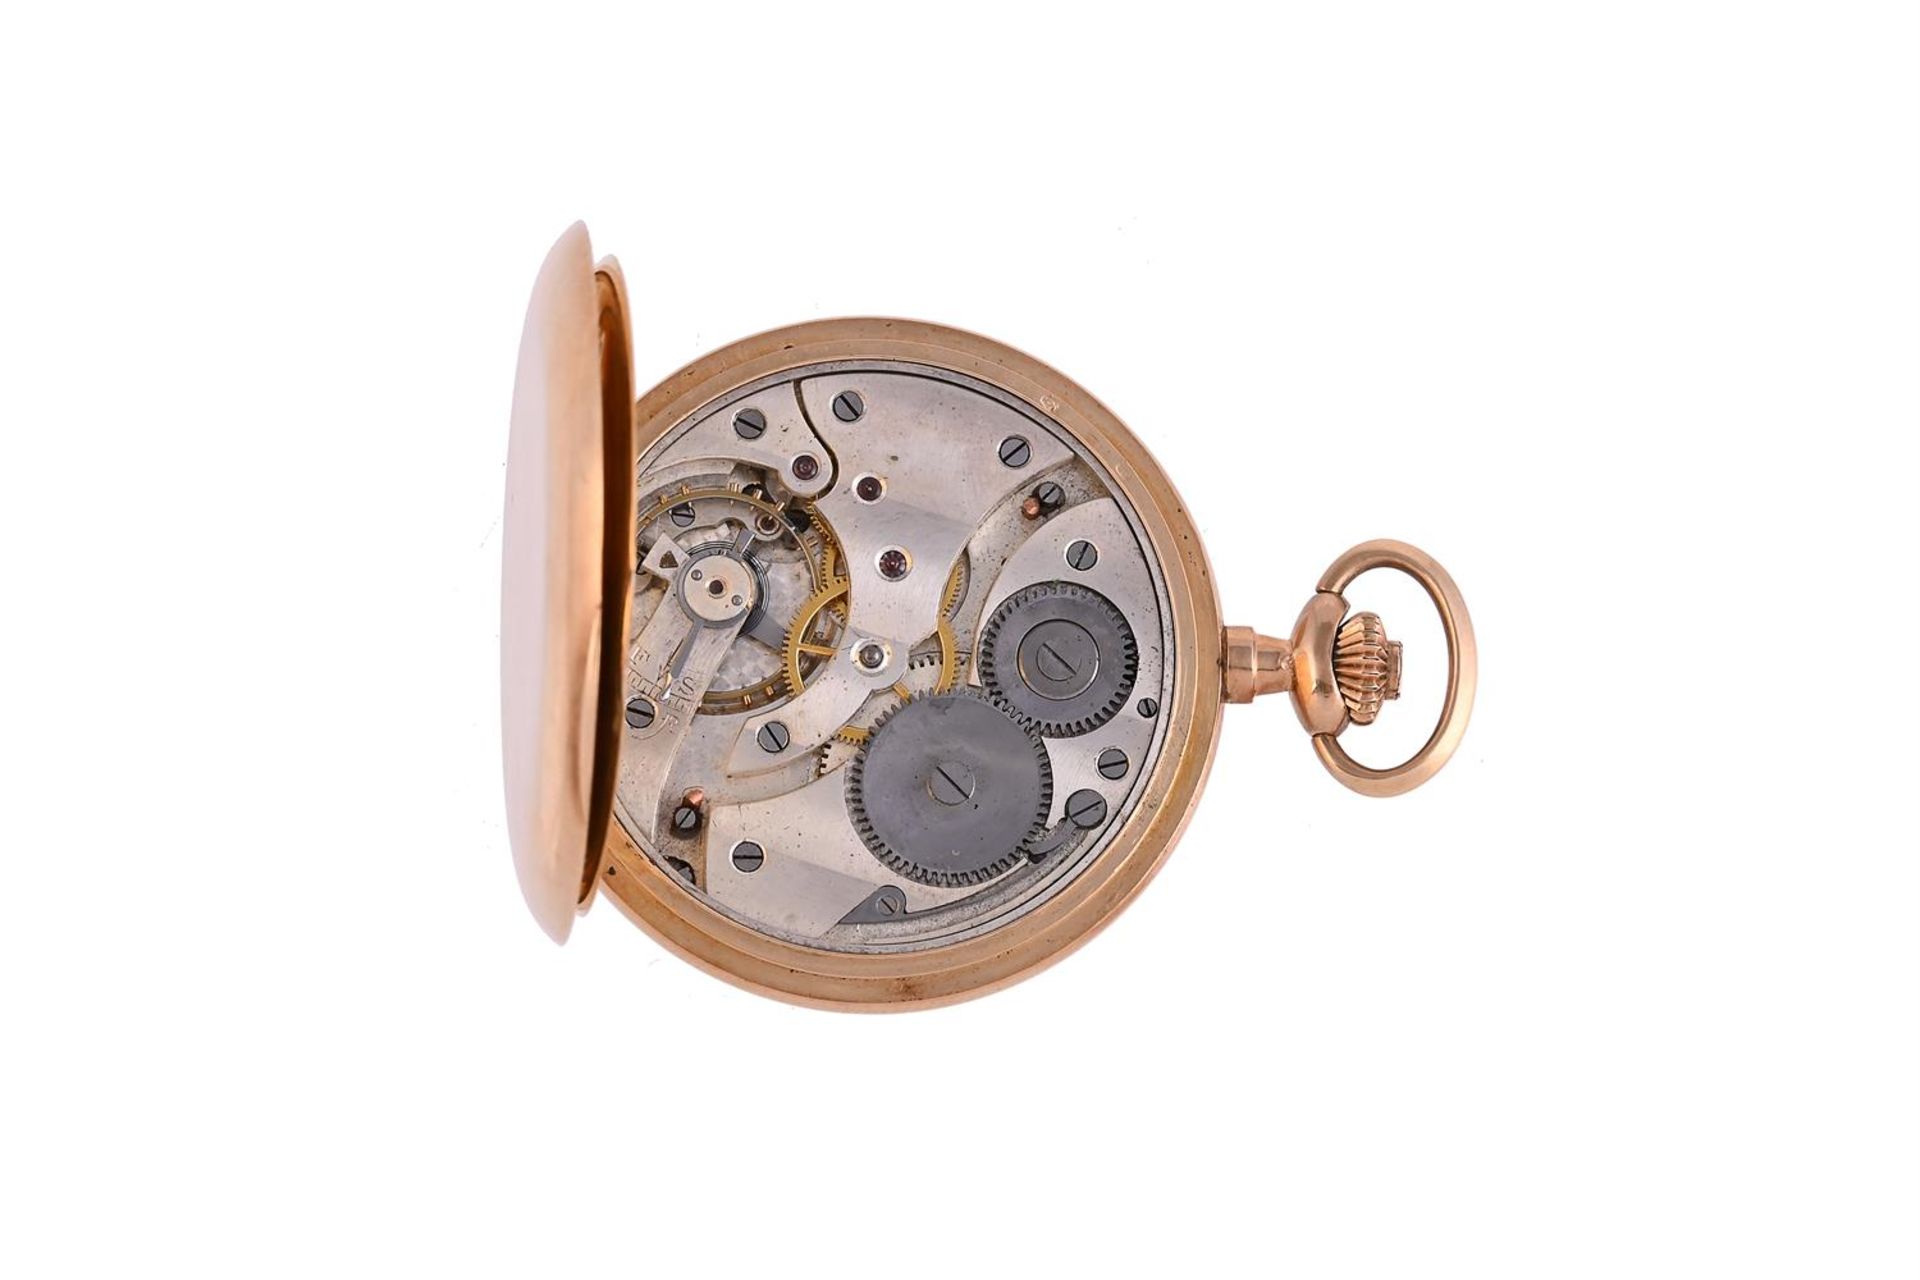 UNSIGNED, A GOLD COLOURED SLIM LINE FULL KEYLESS WIND FULL HUNTER POCKET WATCH - Image 2 of 2